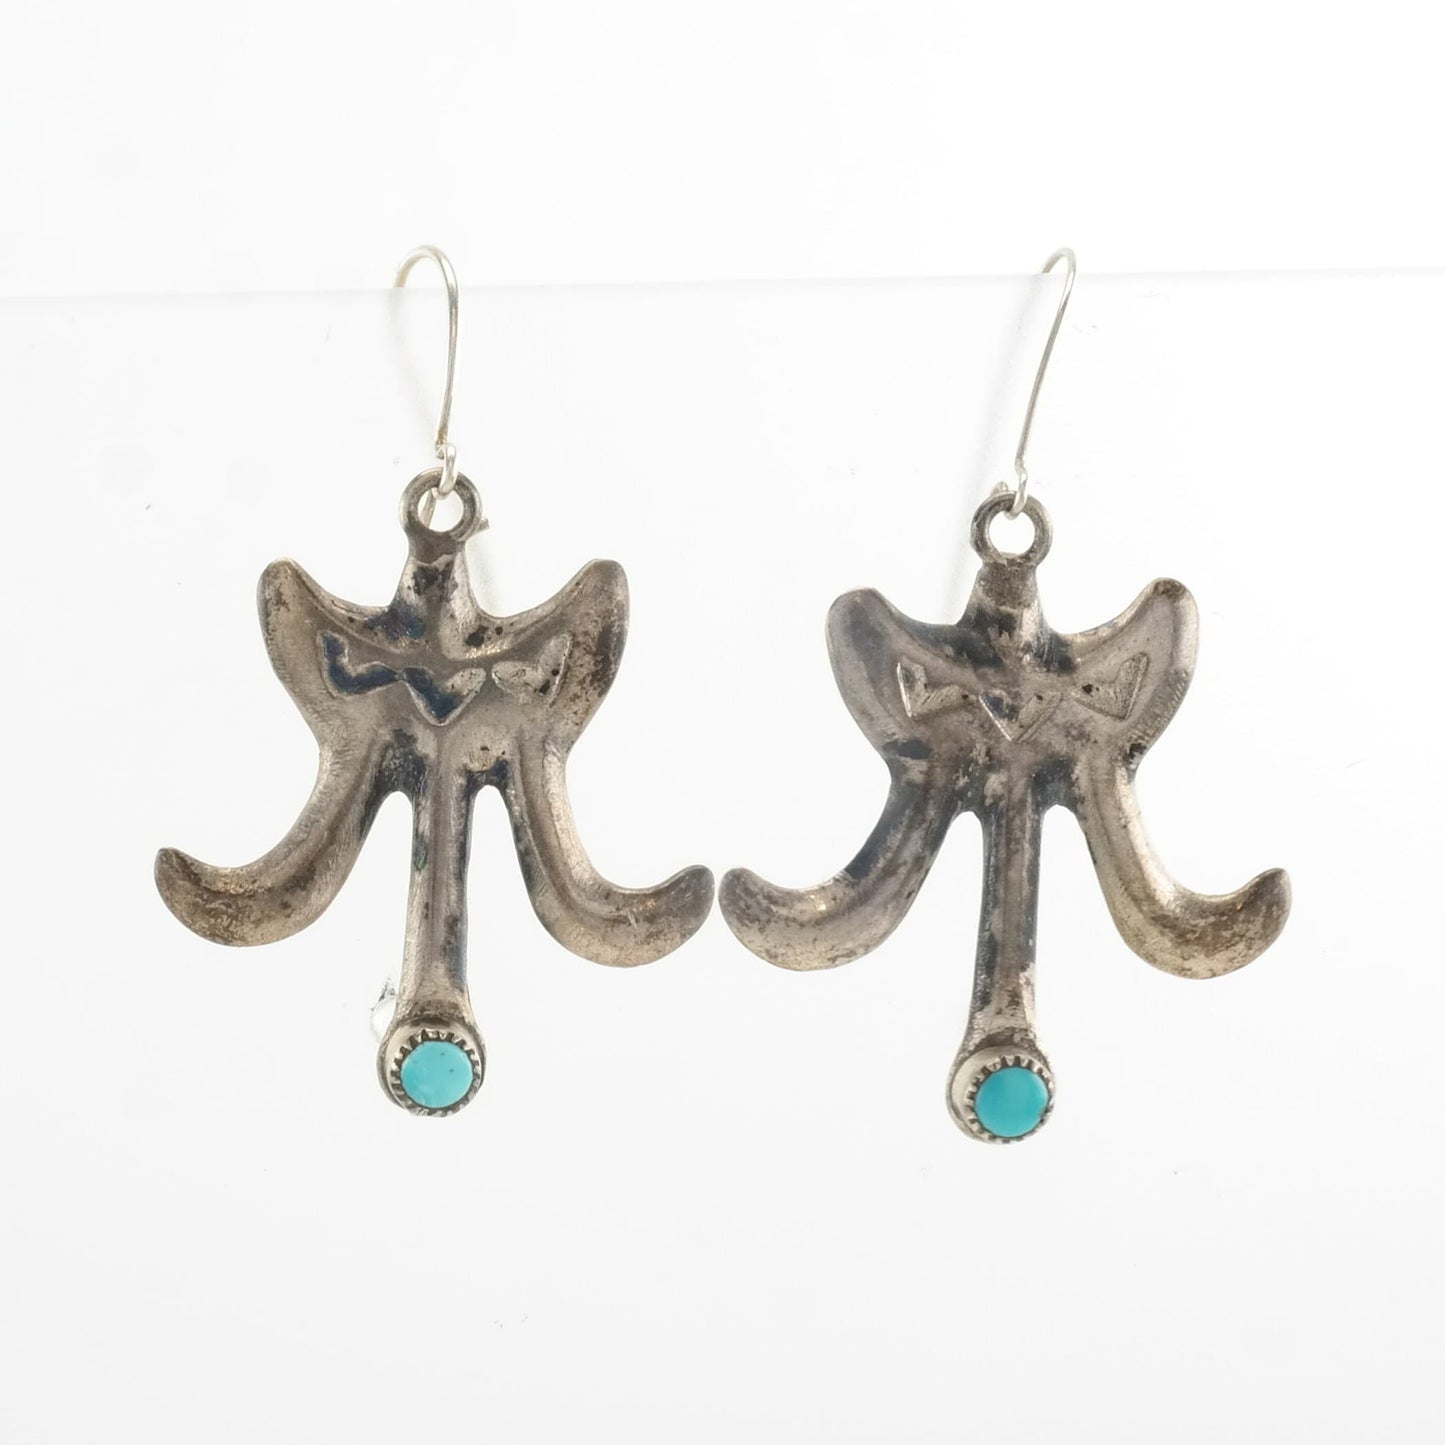 Native American Sterling Silver Turquoise Stamped, Sandcast, Earrings Fish Hook, Dangle